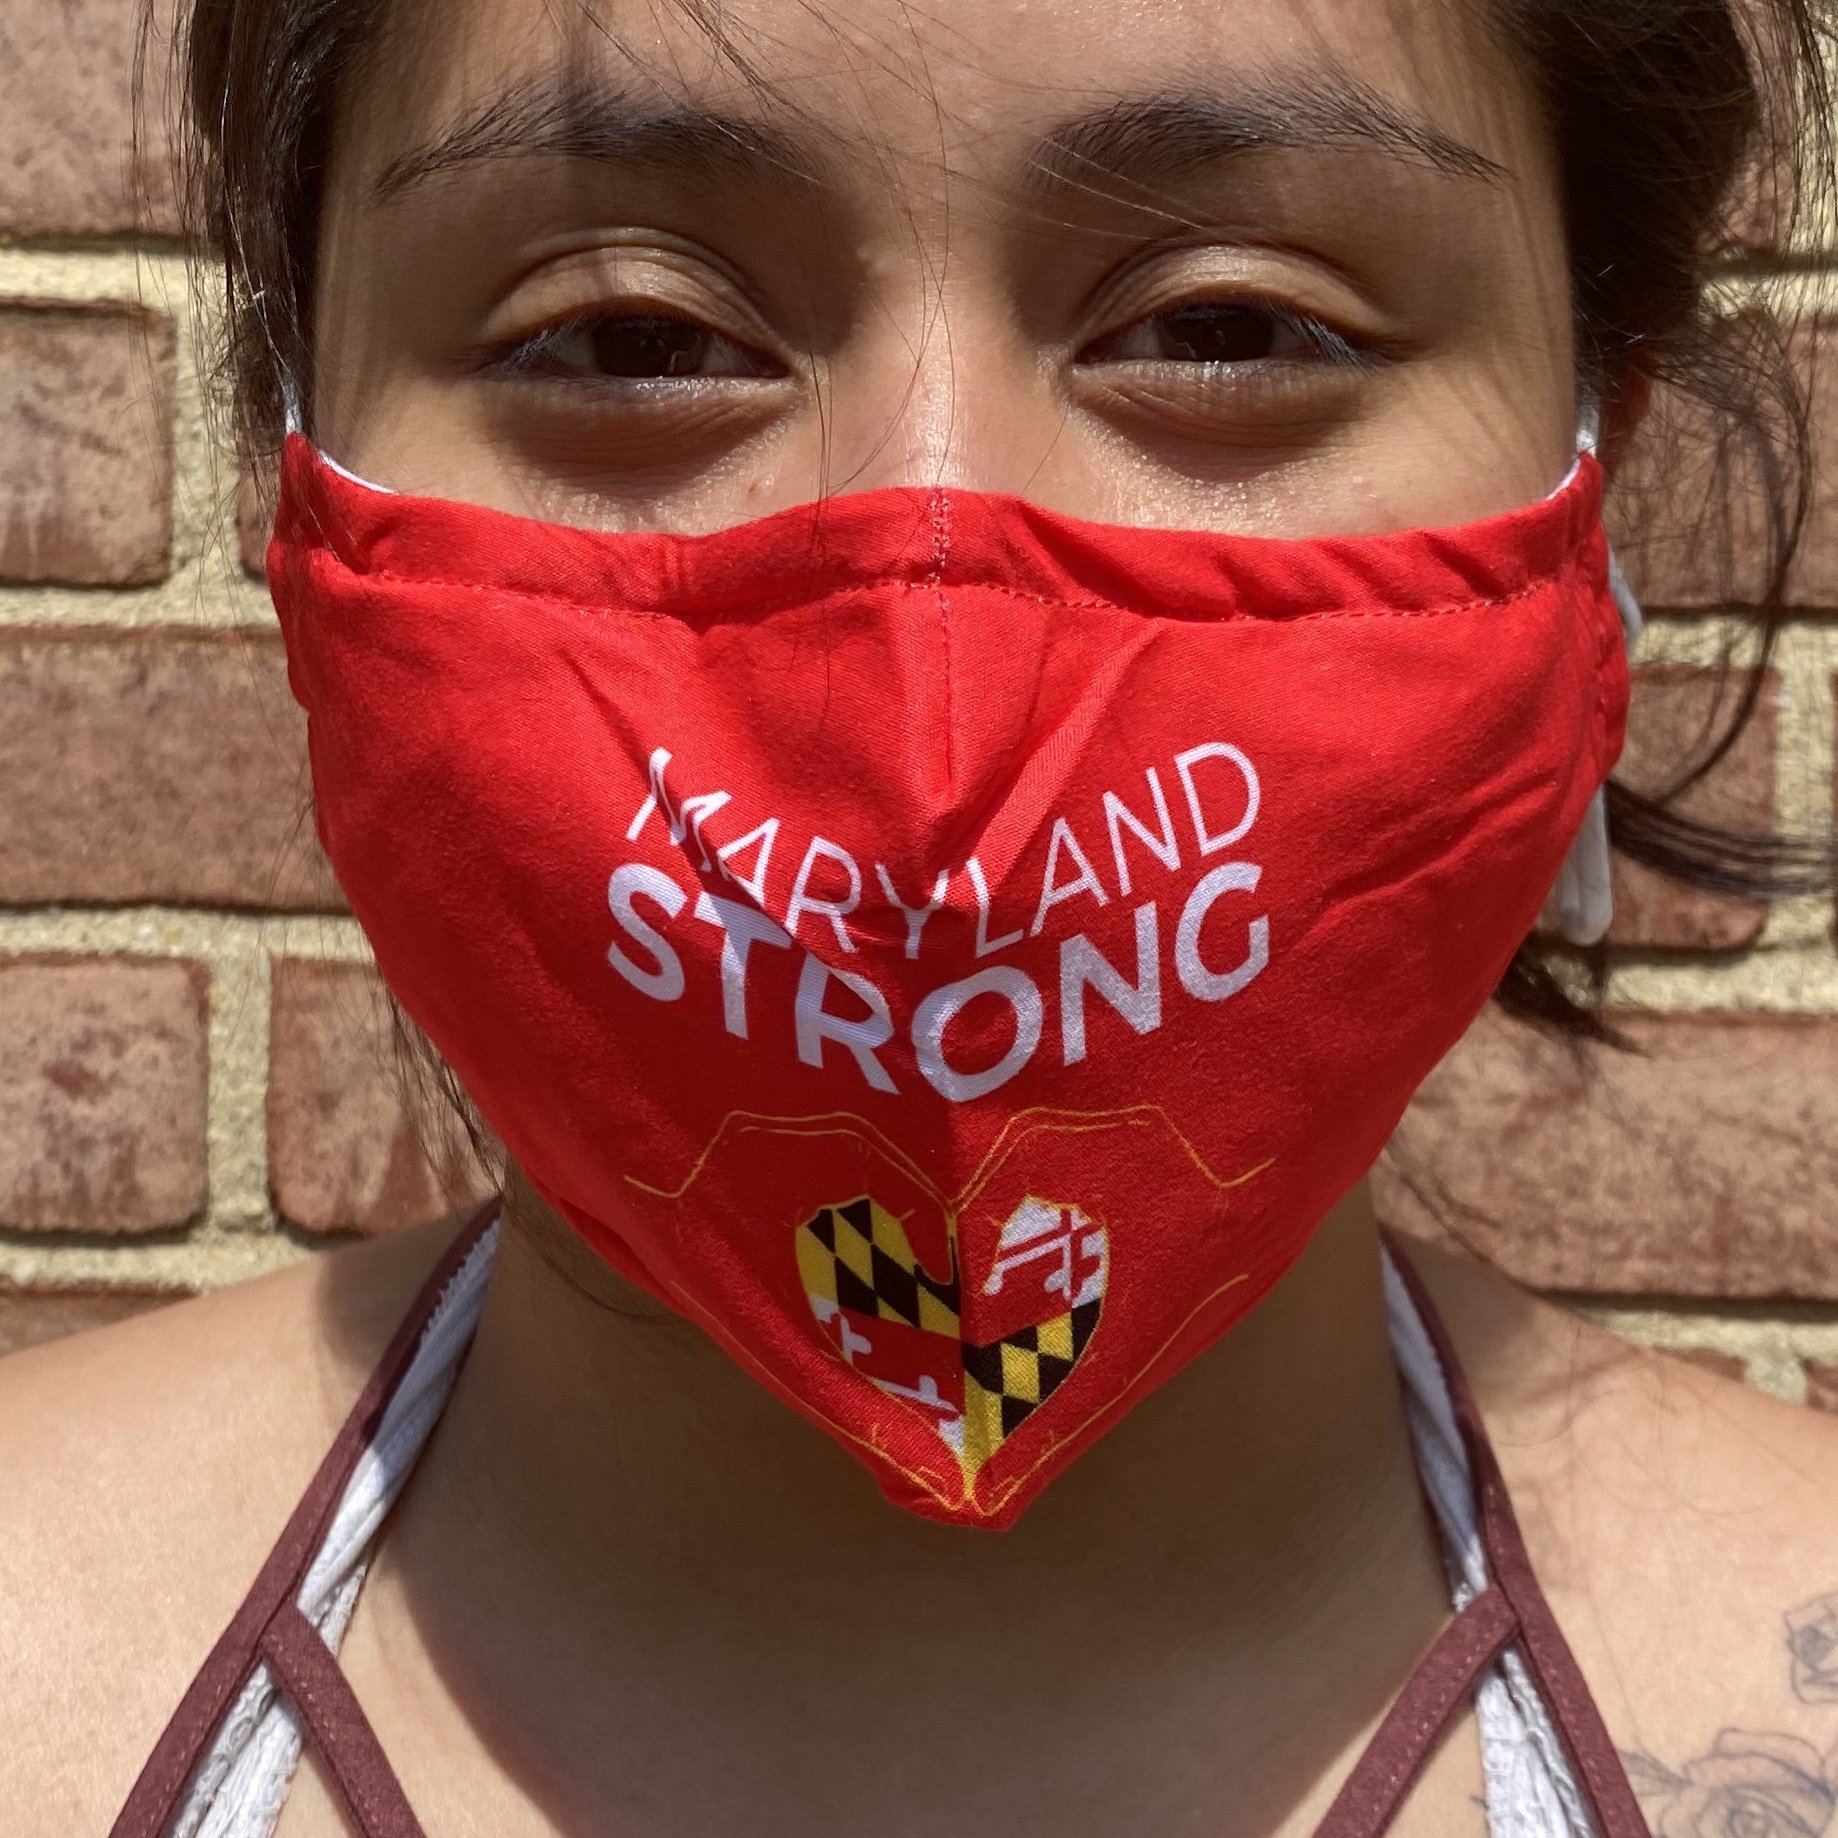 Maryland Strong (Red) / Face Mask - Route One Apparel